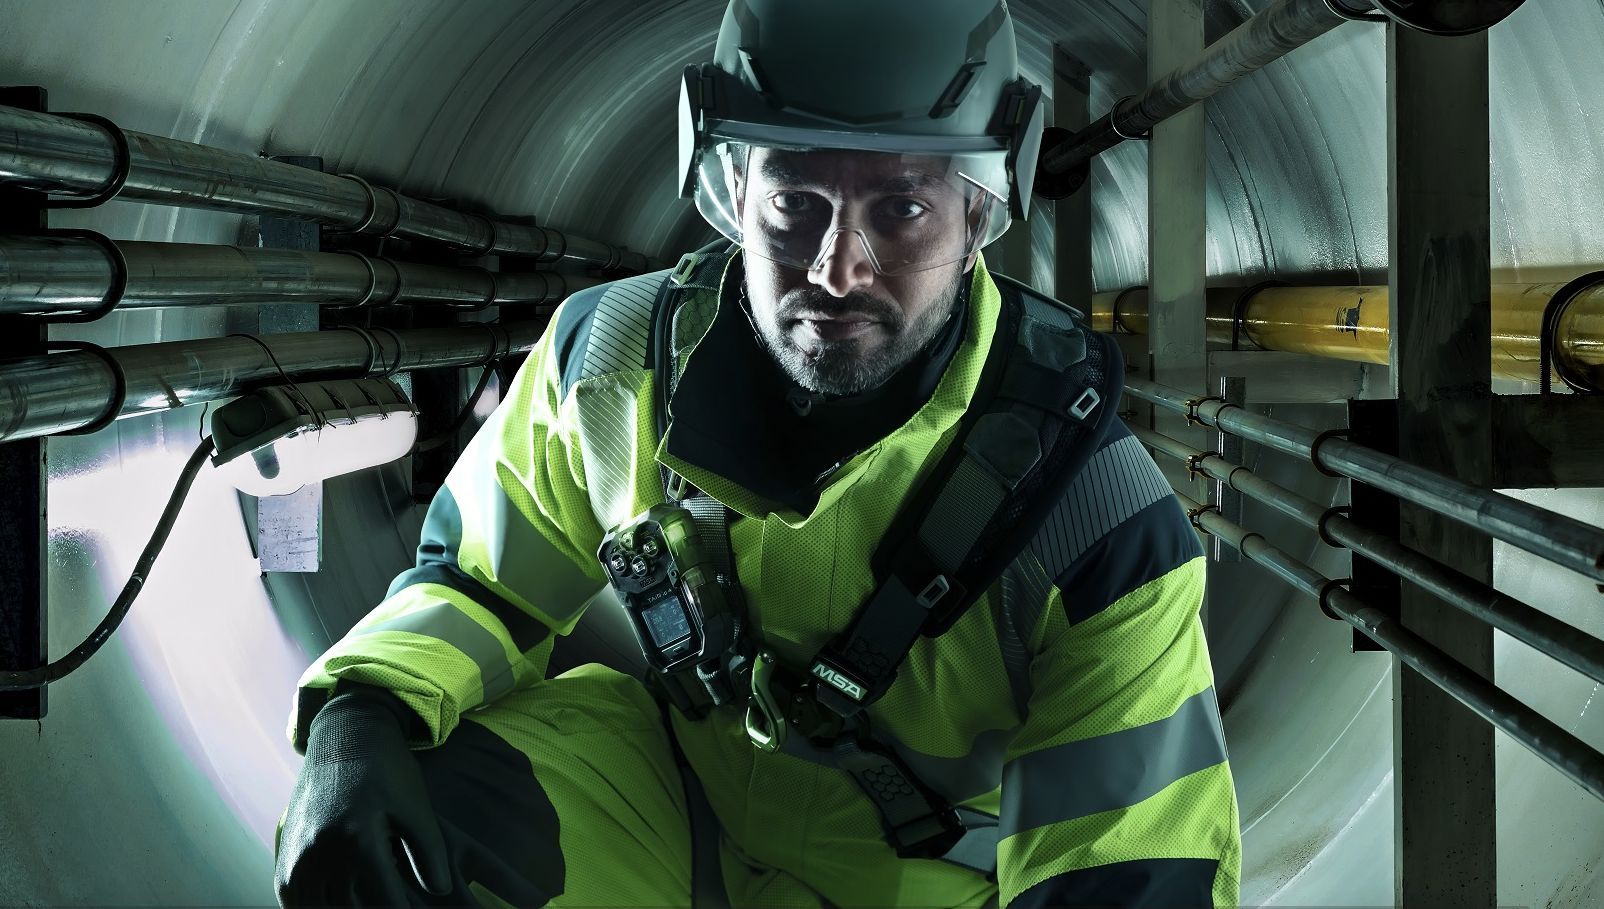 MSA Safety highlights connected safety solutions at A+A Trade Fair and Congress